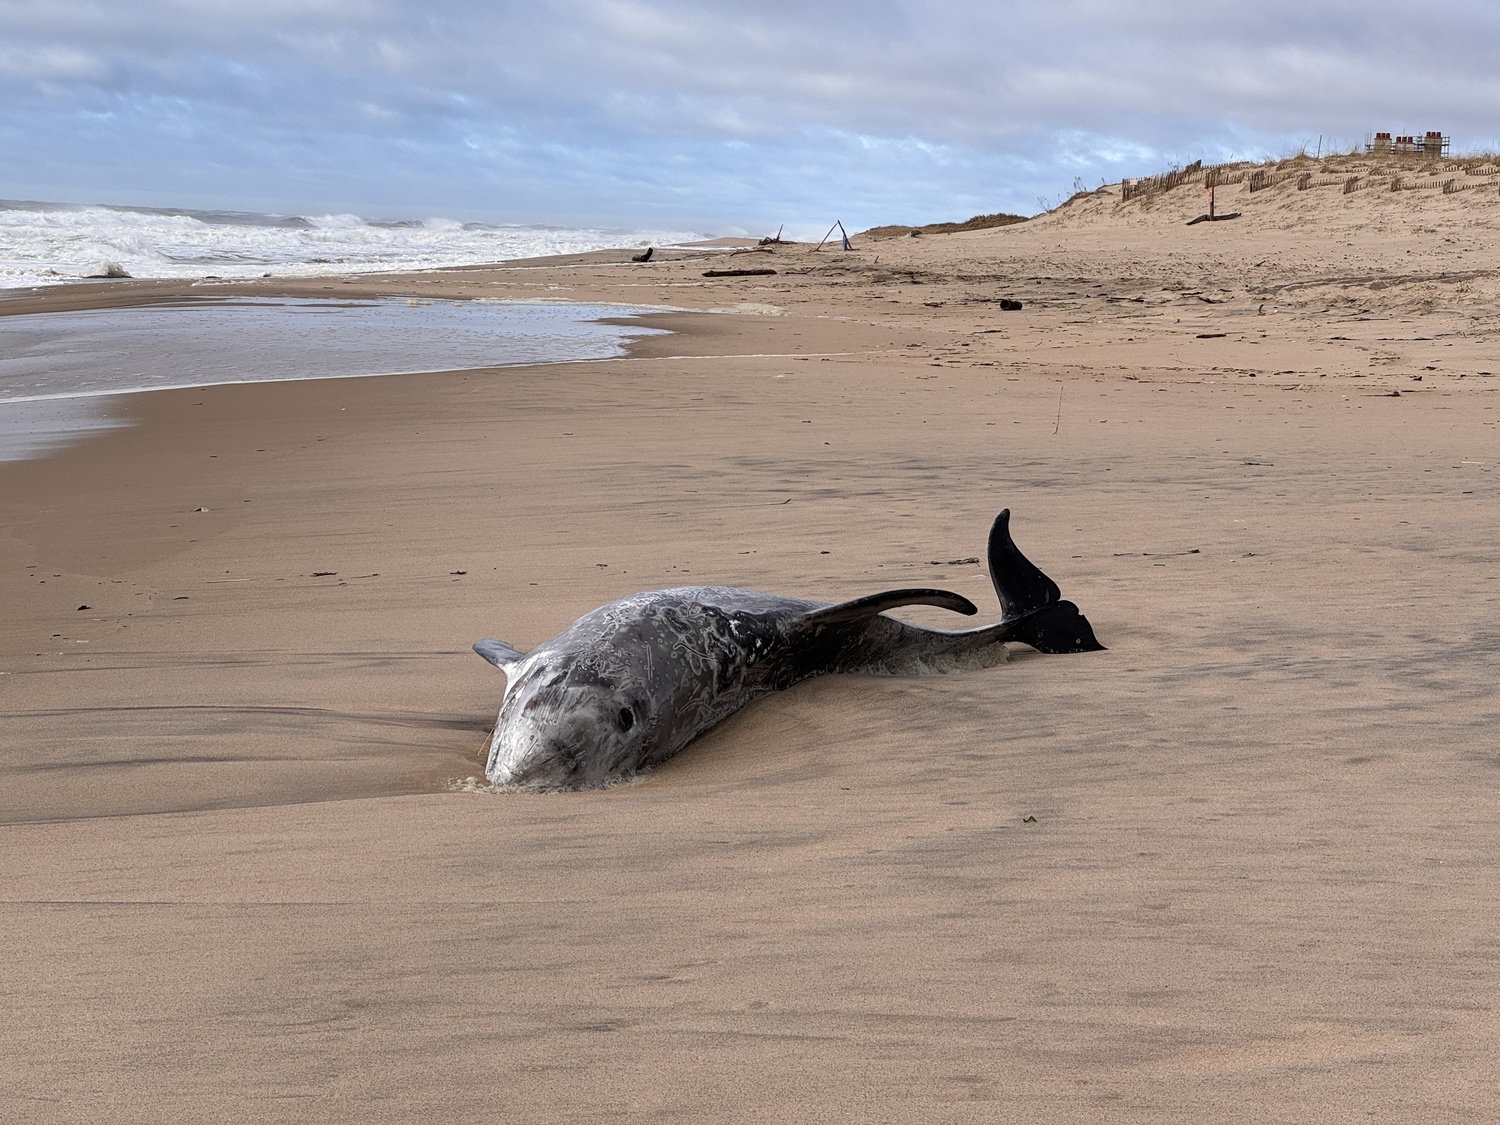 A Risso's dolphin was found washed up on Georgica Beach in East Hampton Village Sunday morning. MICHAEL WRIGHT